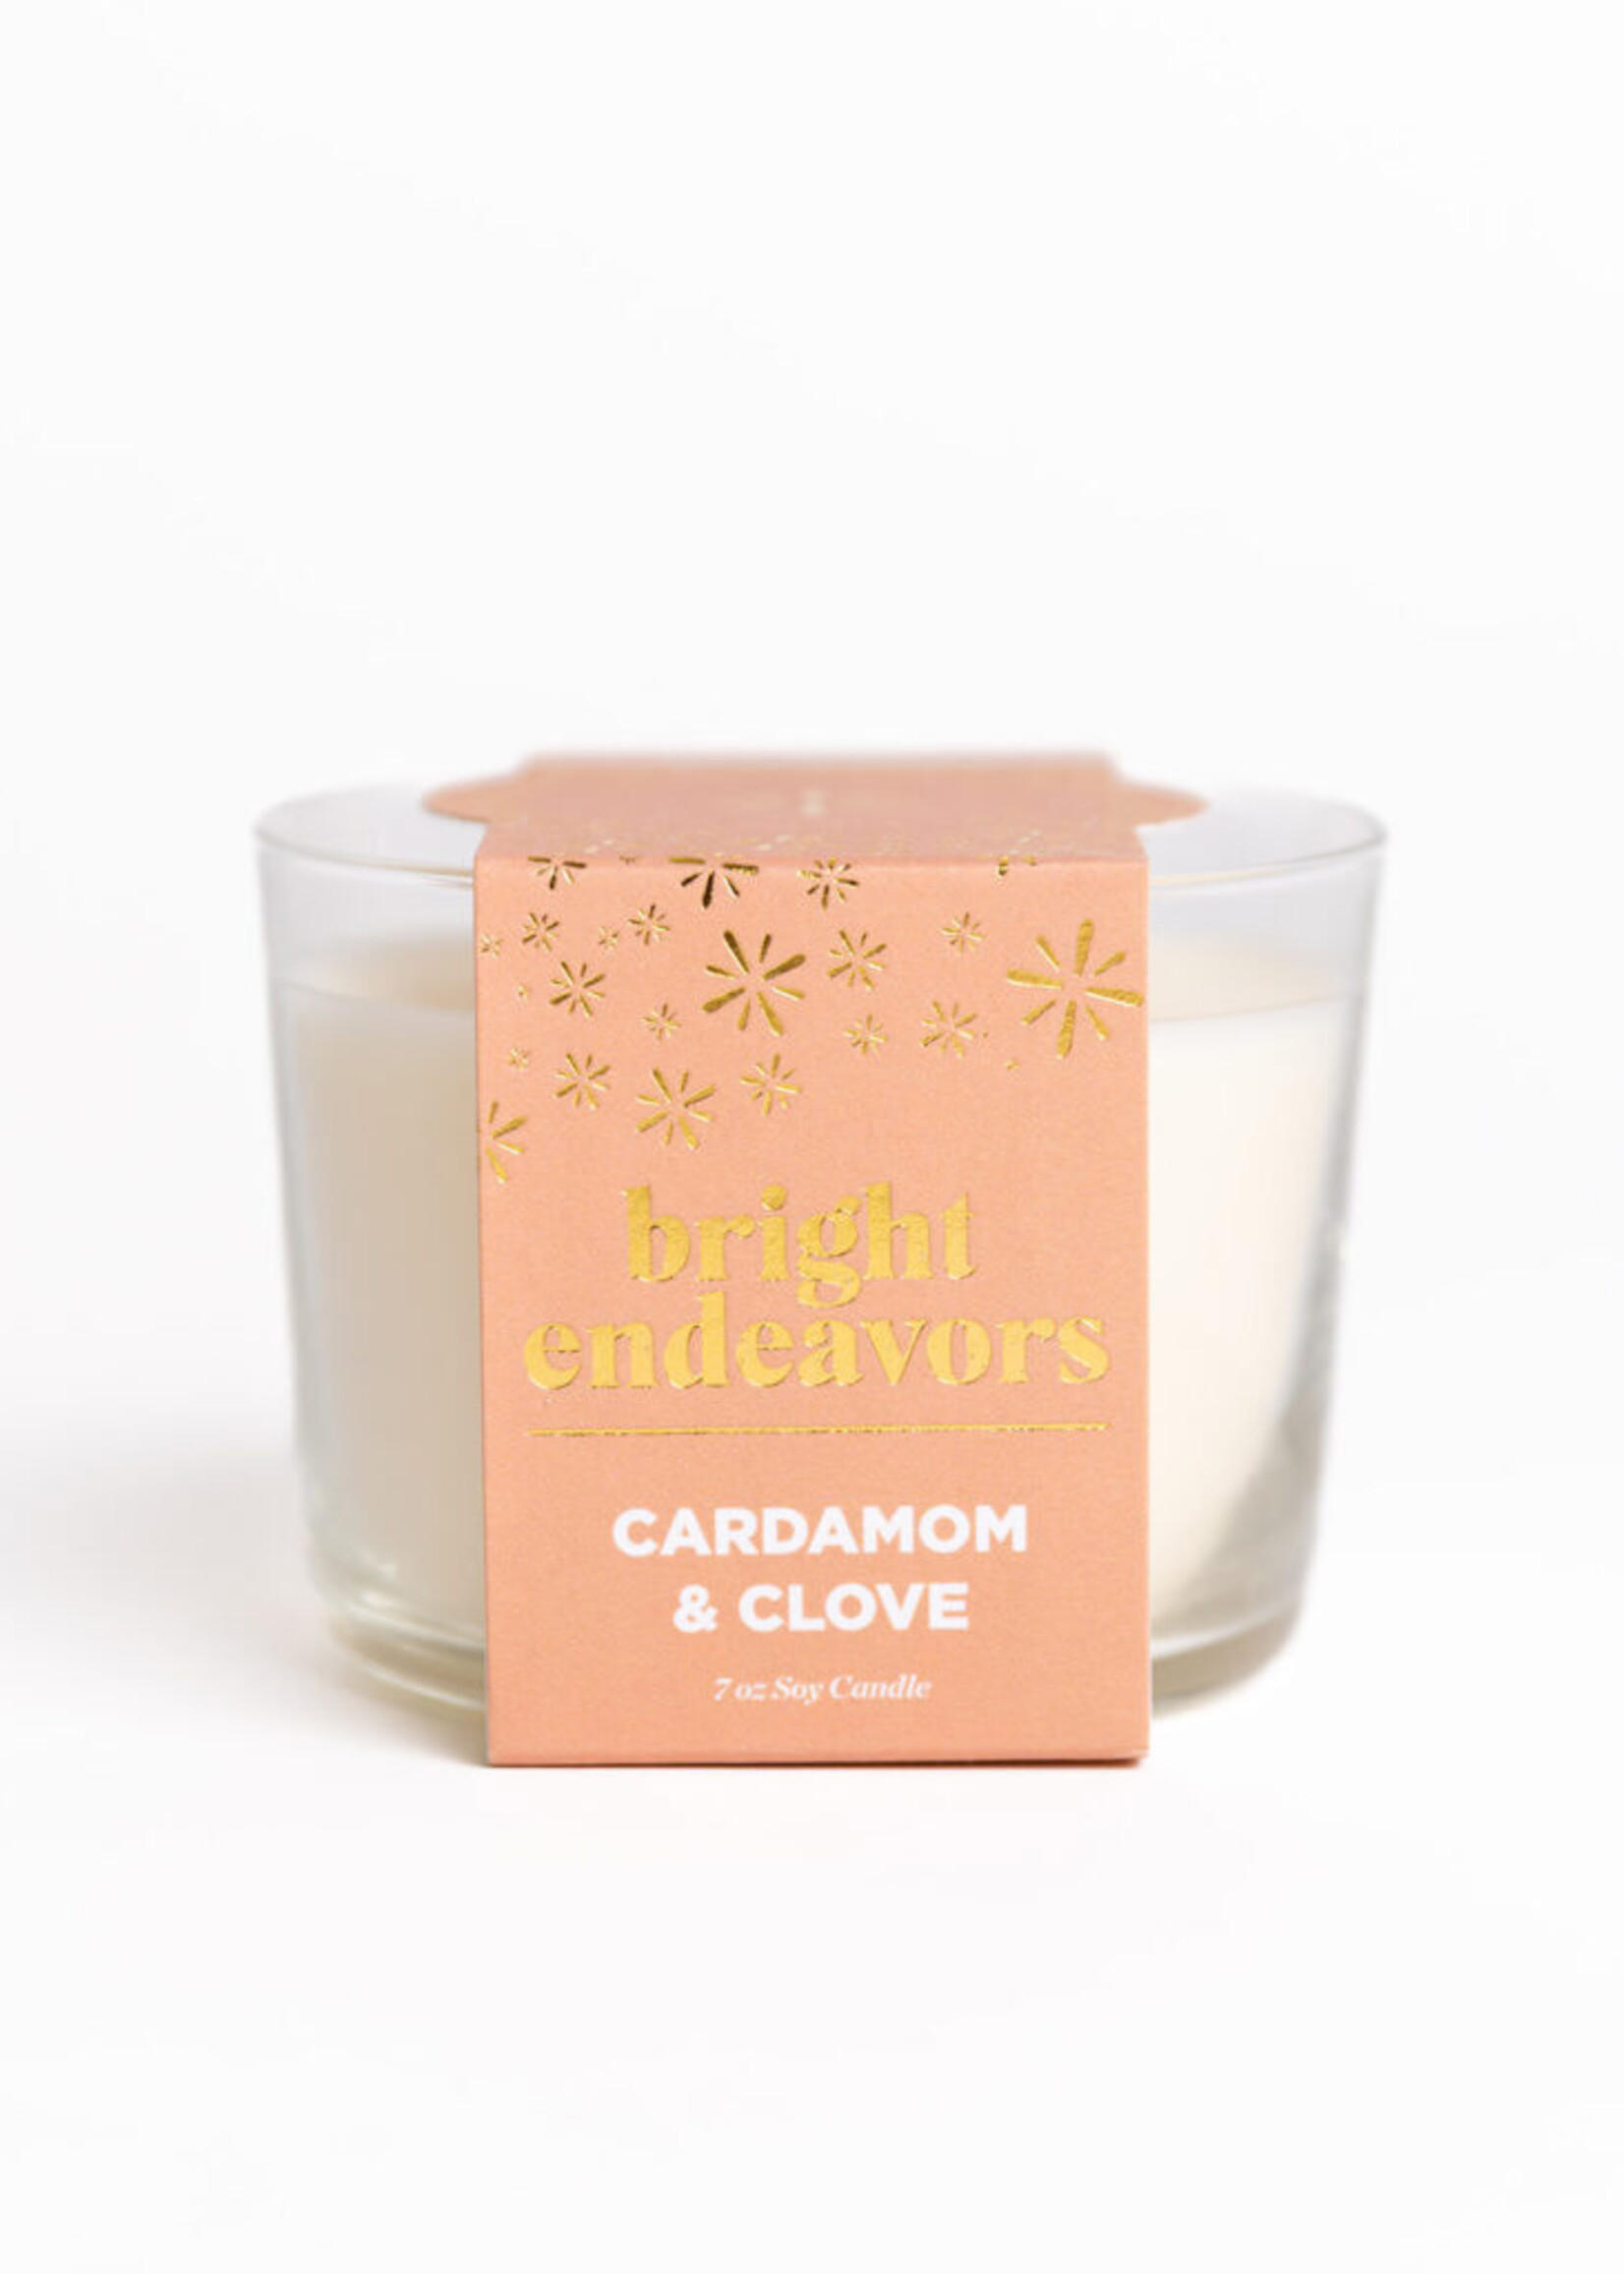 Bright Endeavors Cardamom & Clove Soy Candle